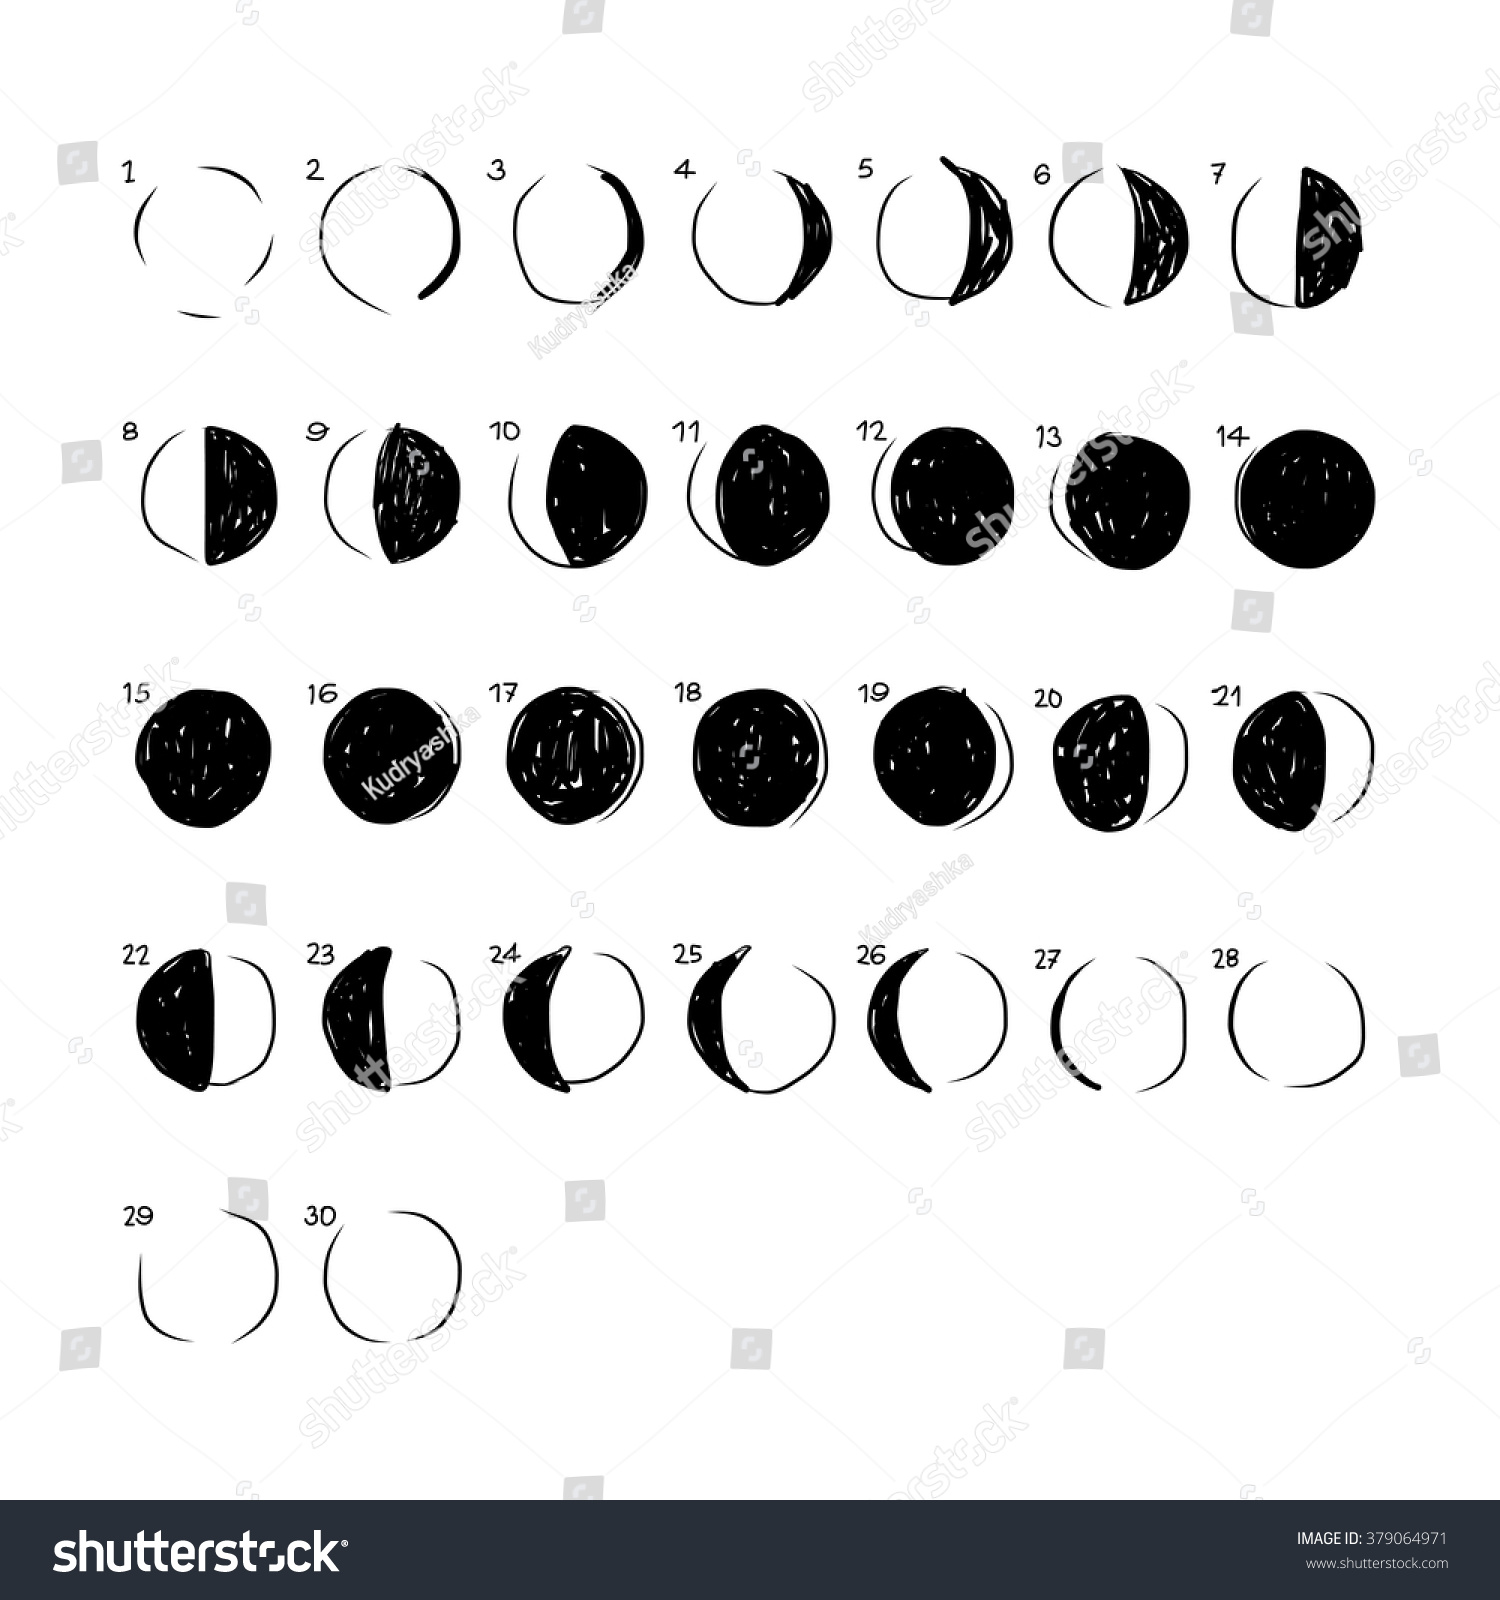 Phases Moon Sketch Your Design Stock Vector 379064971 - Shutterstock